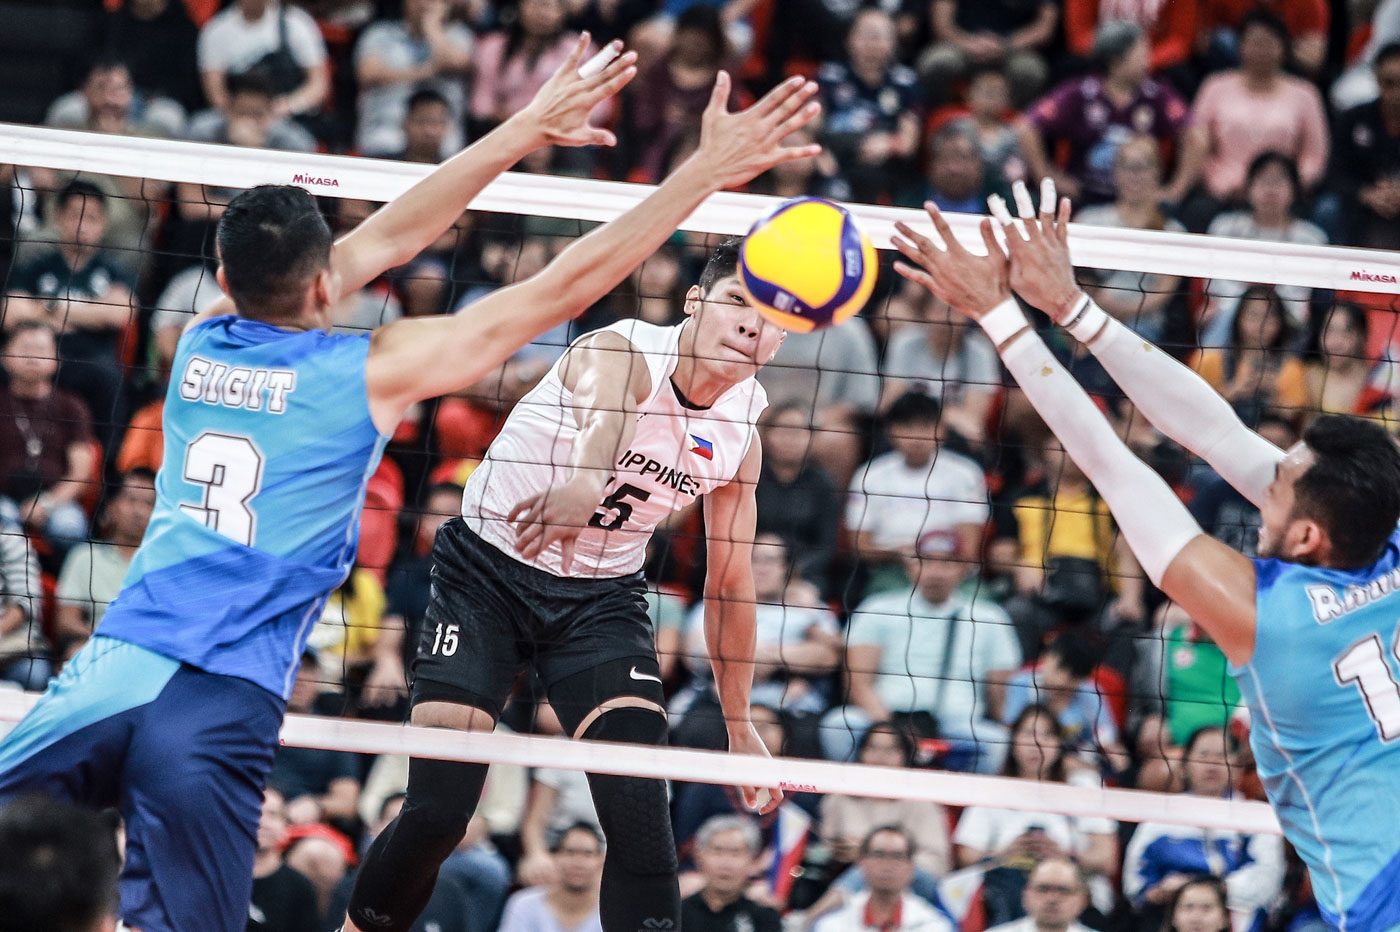 Indonesia breaks PH’s hearts in men’s volleyball sweep